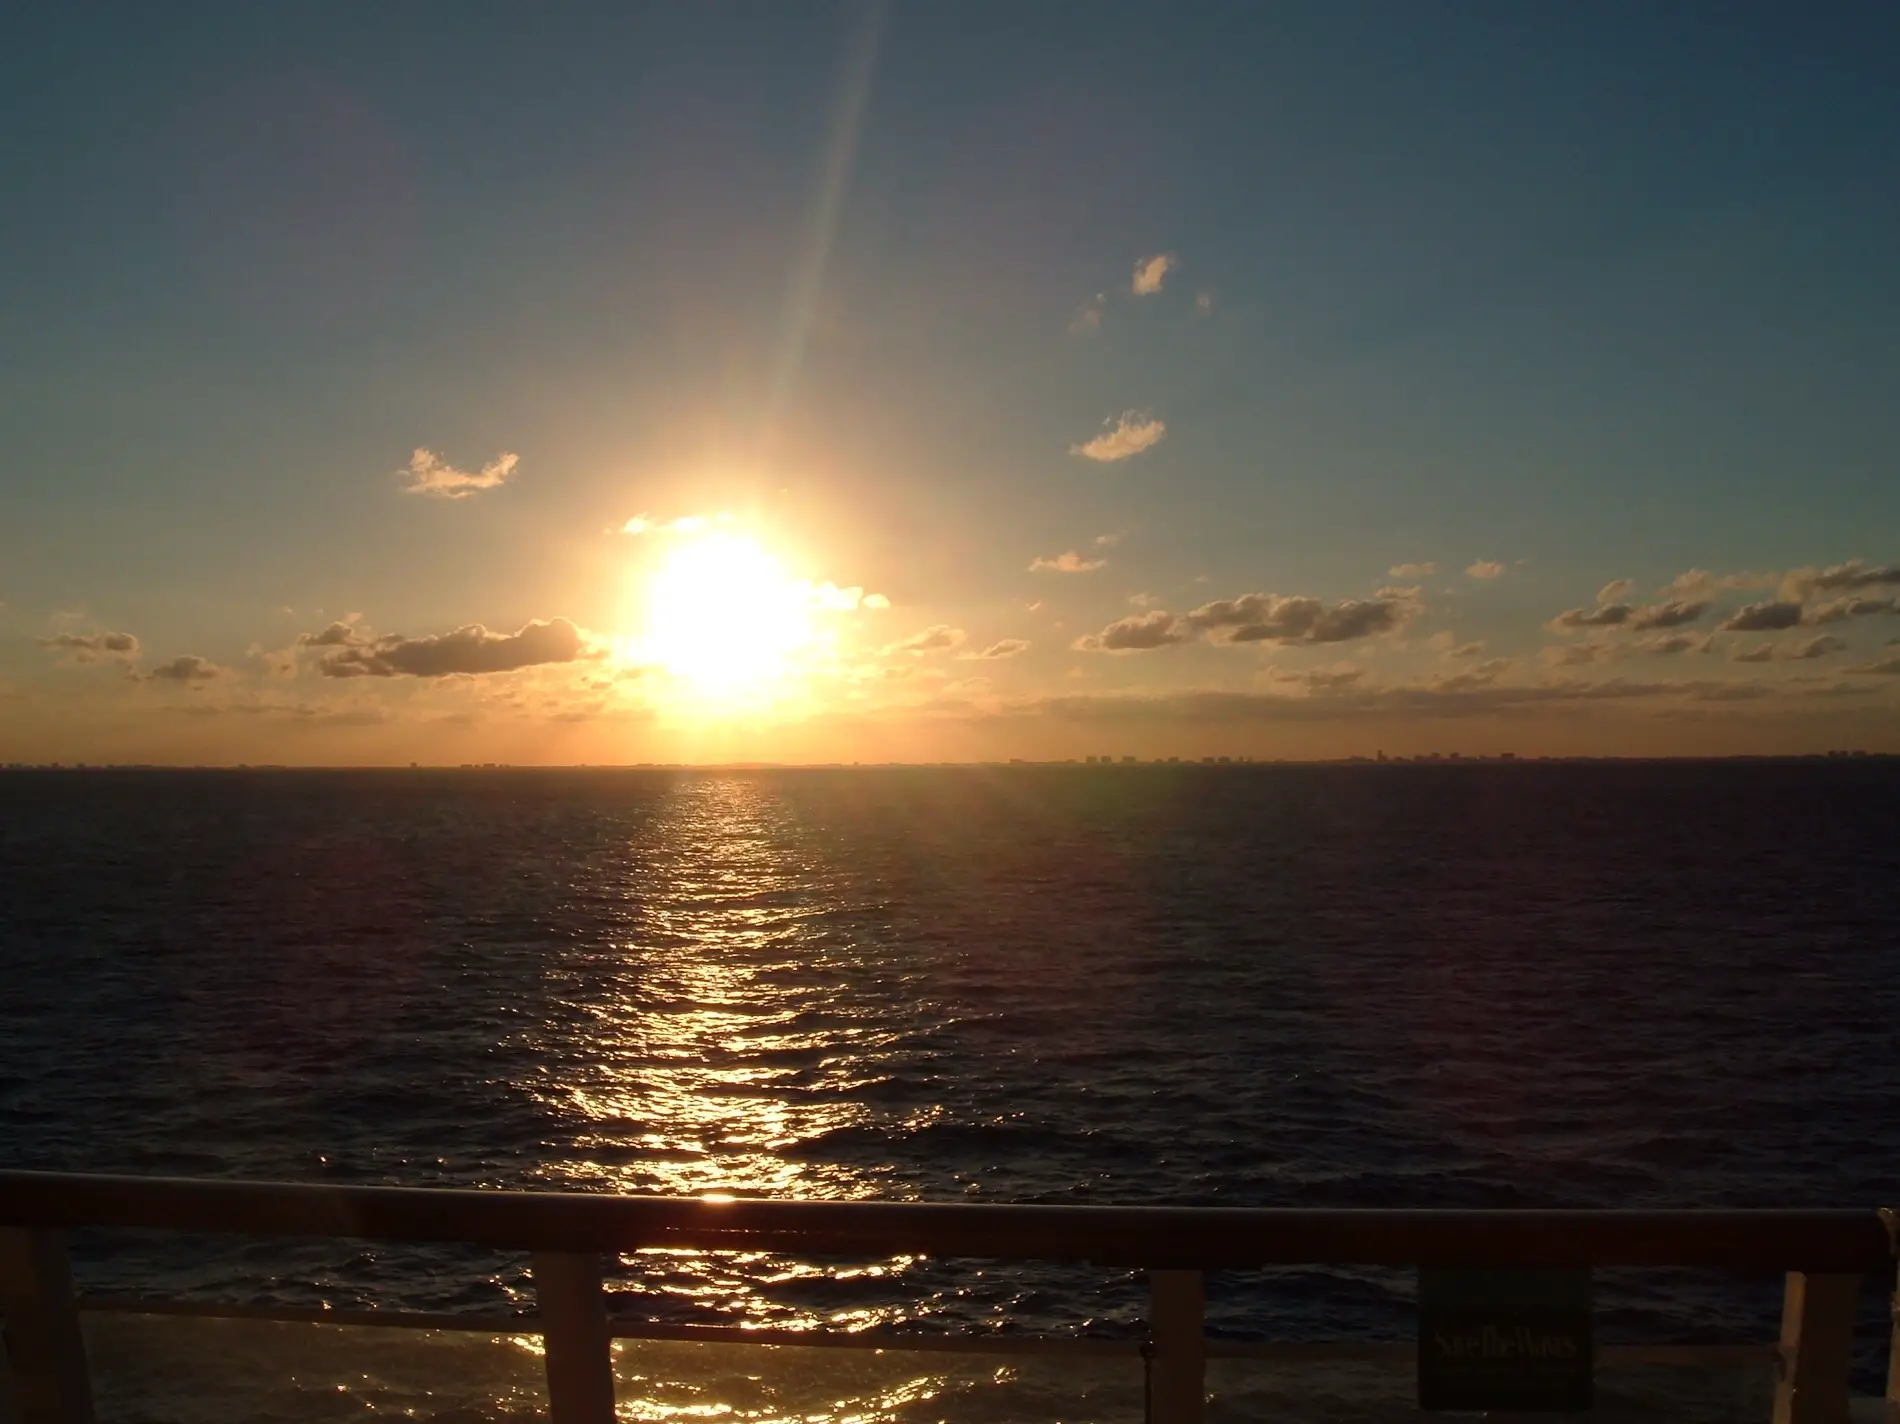 Celebrity Edge; Caribbean Dream Itinerary - Caribbean Sunset from a Cruise Ship